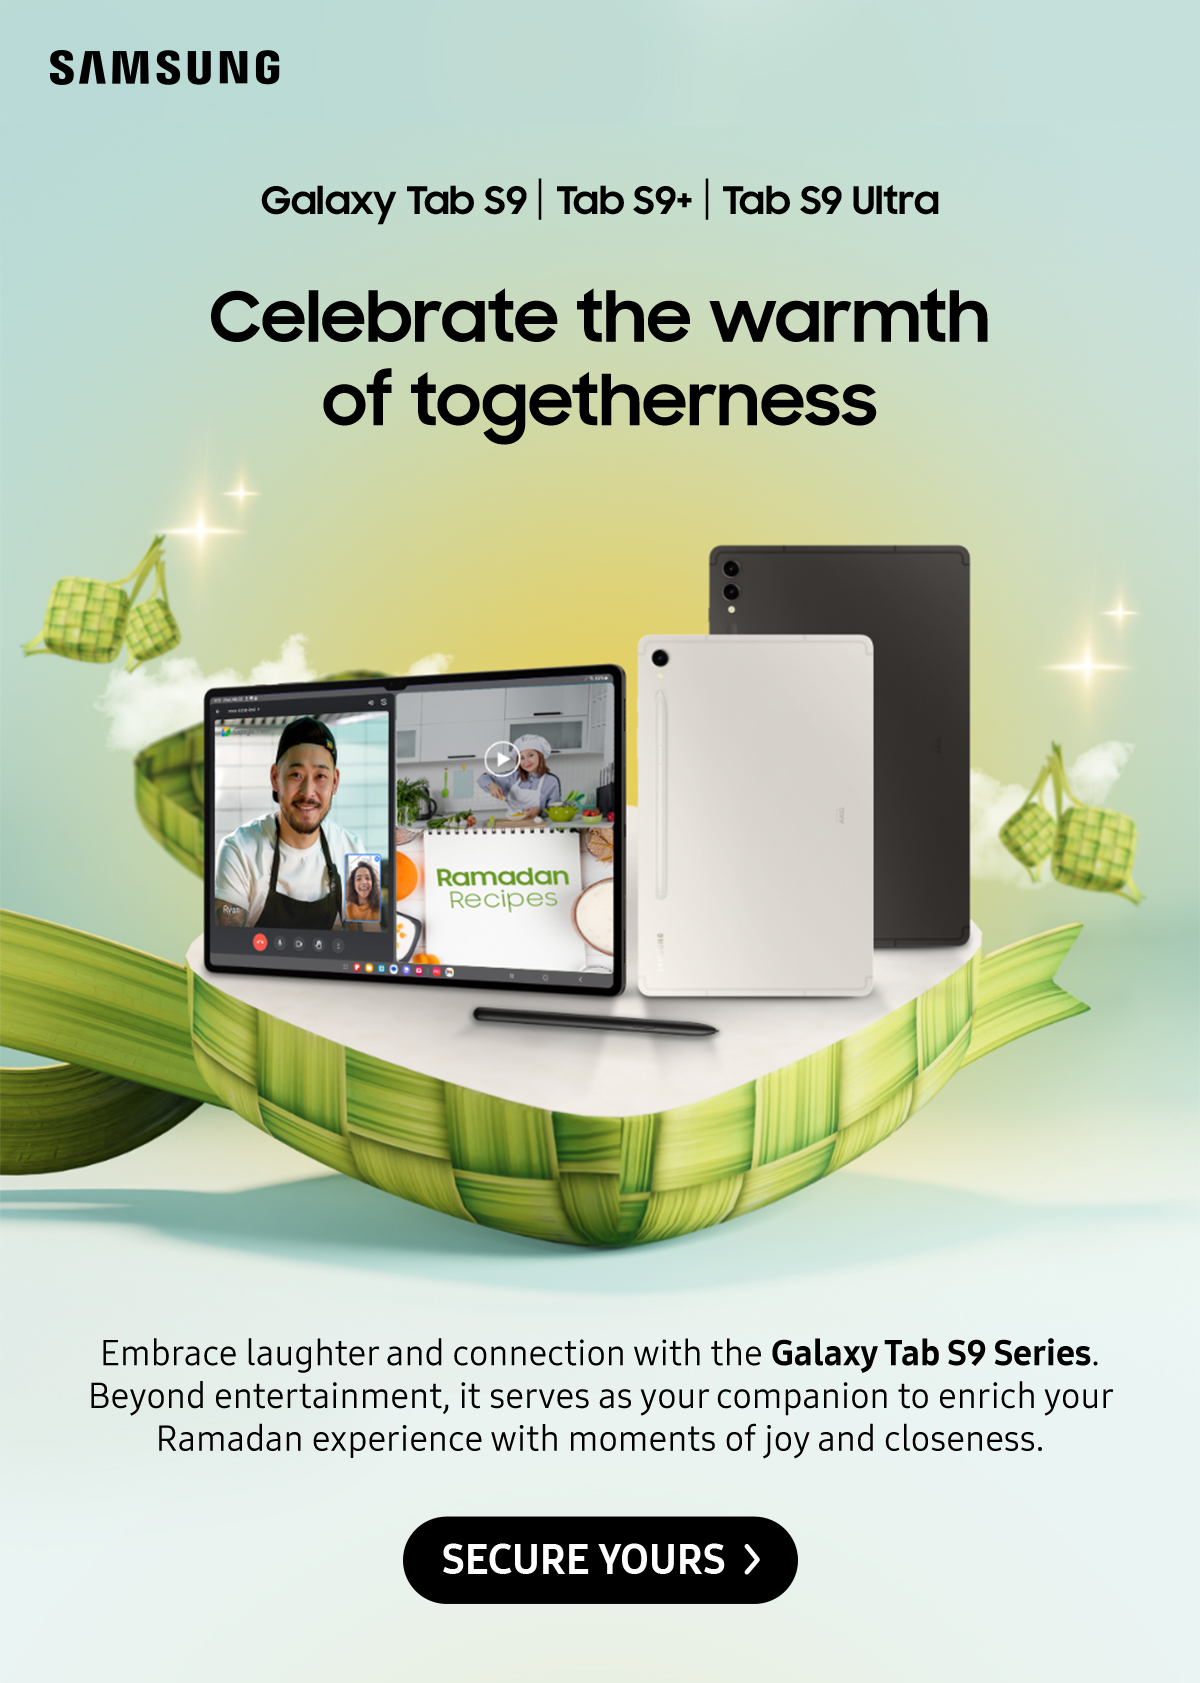 Celebrate the warmth of togetherness | Embrace laughter and connection with the Galaxy Tab S9 Series. Beyond entertainment, it serves as your companion to enrich your Ramadan experience with moments of joy and closeness.